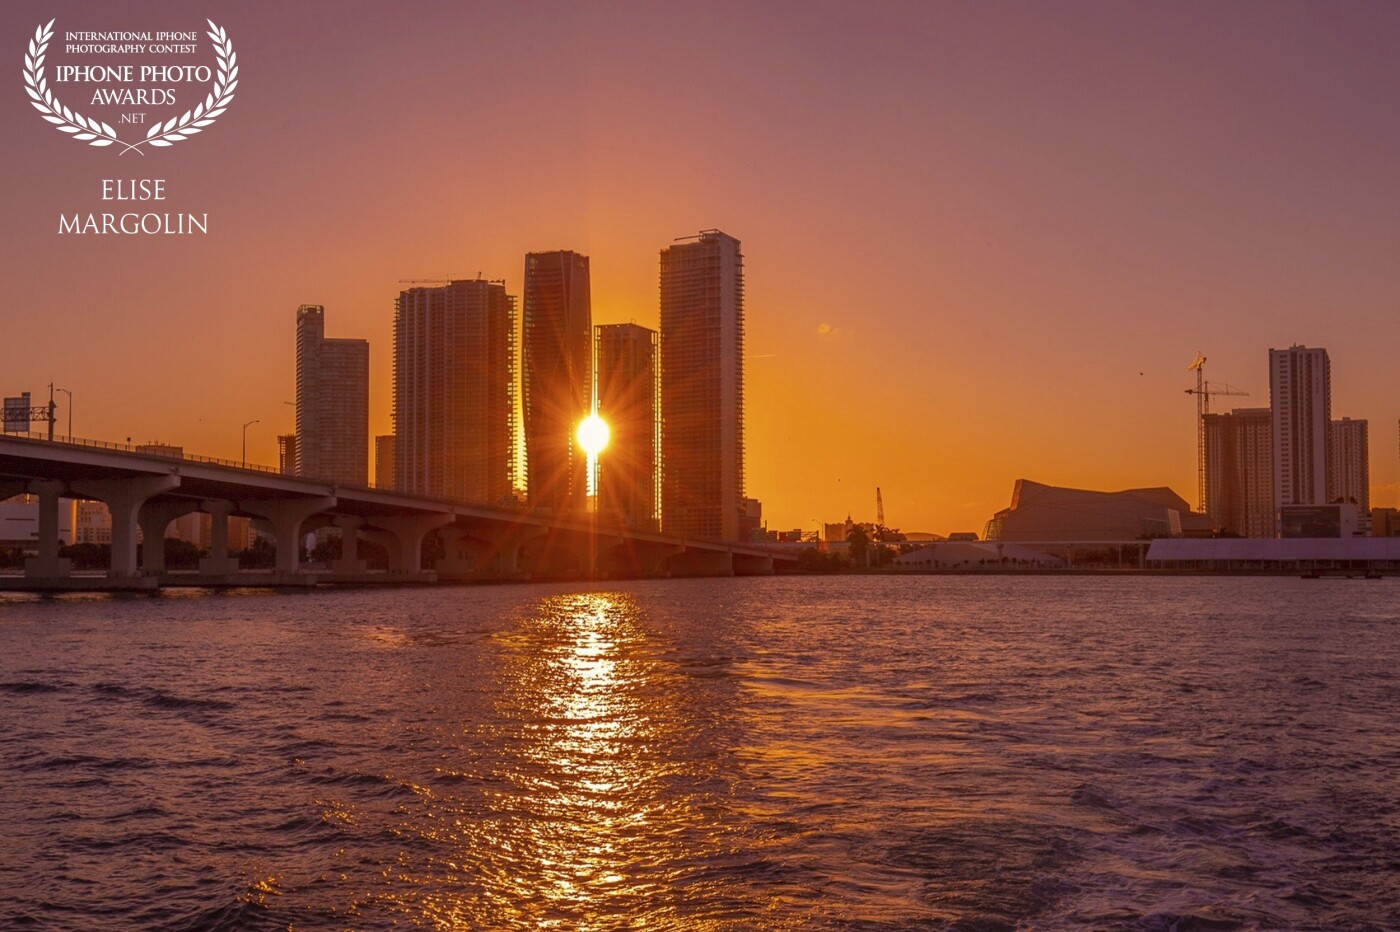 The Miami skyline, another one of my favorite cityscapes. Even better when captured at during Golden Hour. Miami brings both favorites to life. The serenity of beach and ocean life, as well as a gorgeous city backdrop. Two beauties in one!